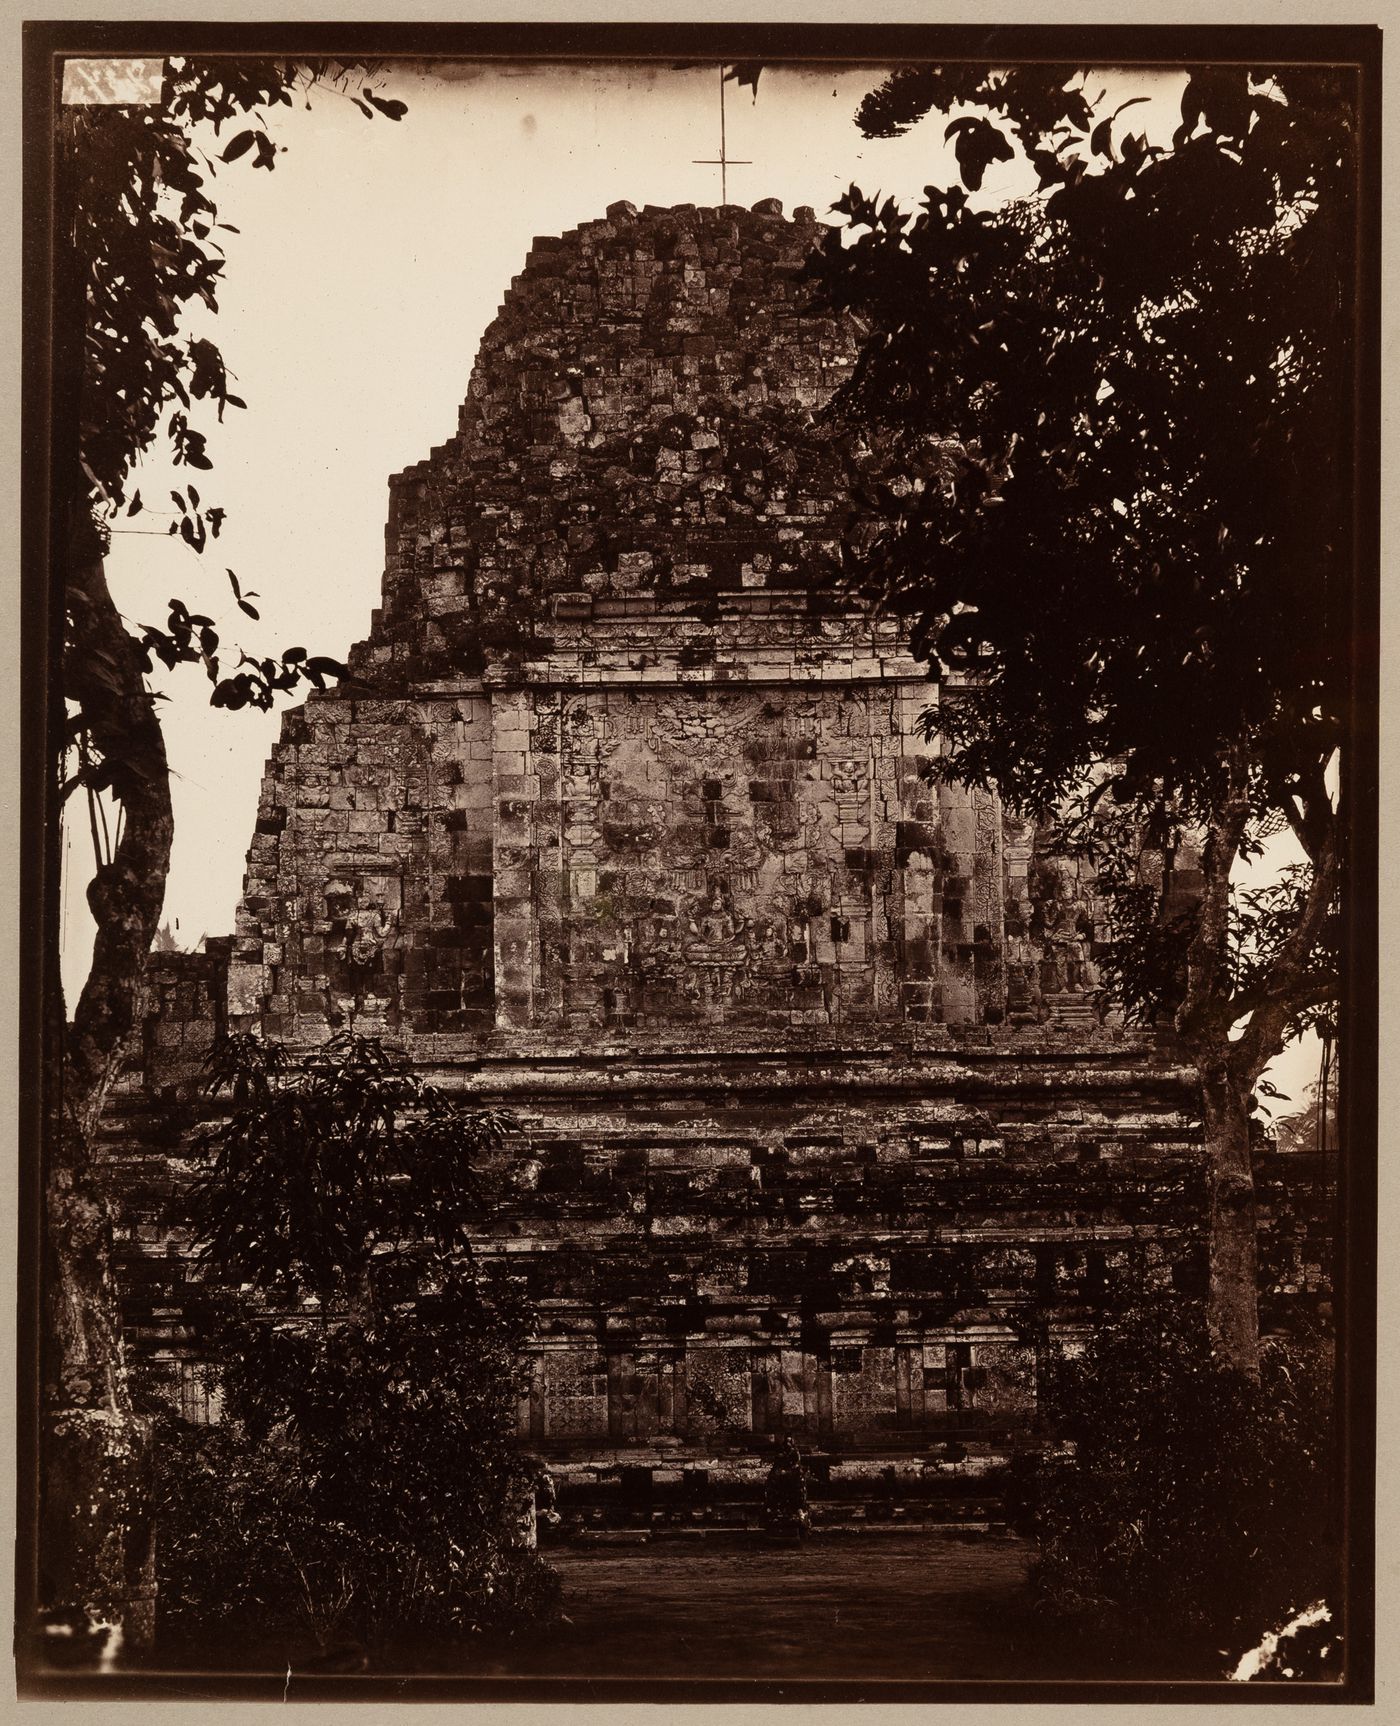 View of the ruins of Mendut Temple (also known as Candi Mendut) showing the main stupa, near Magelang, Dutch East Indies (now Indonesia)